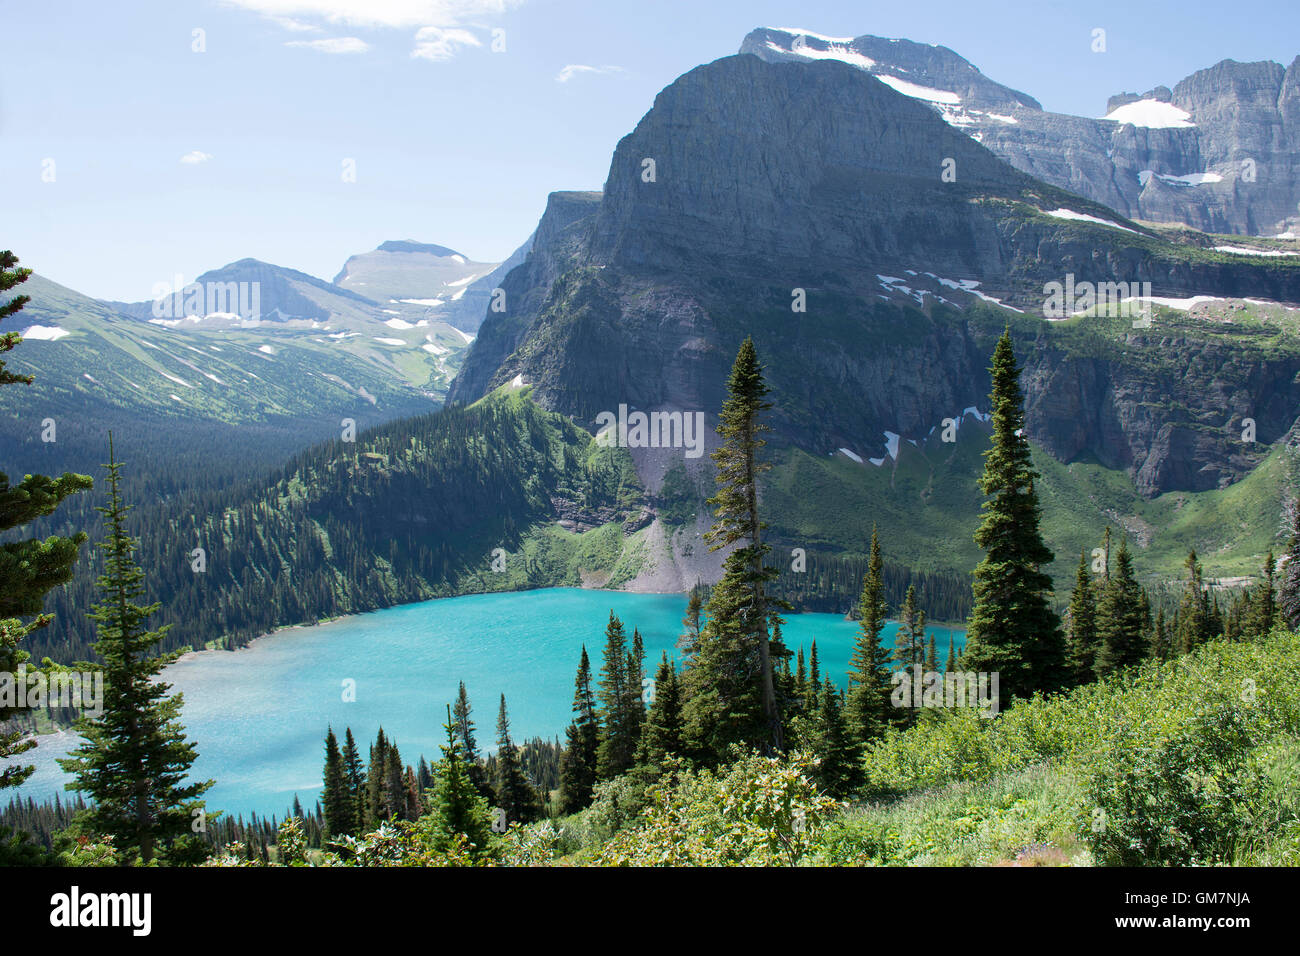 View of Grinnell Lake in Glacier National Park, Montana, United States. Stock Photo